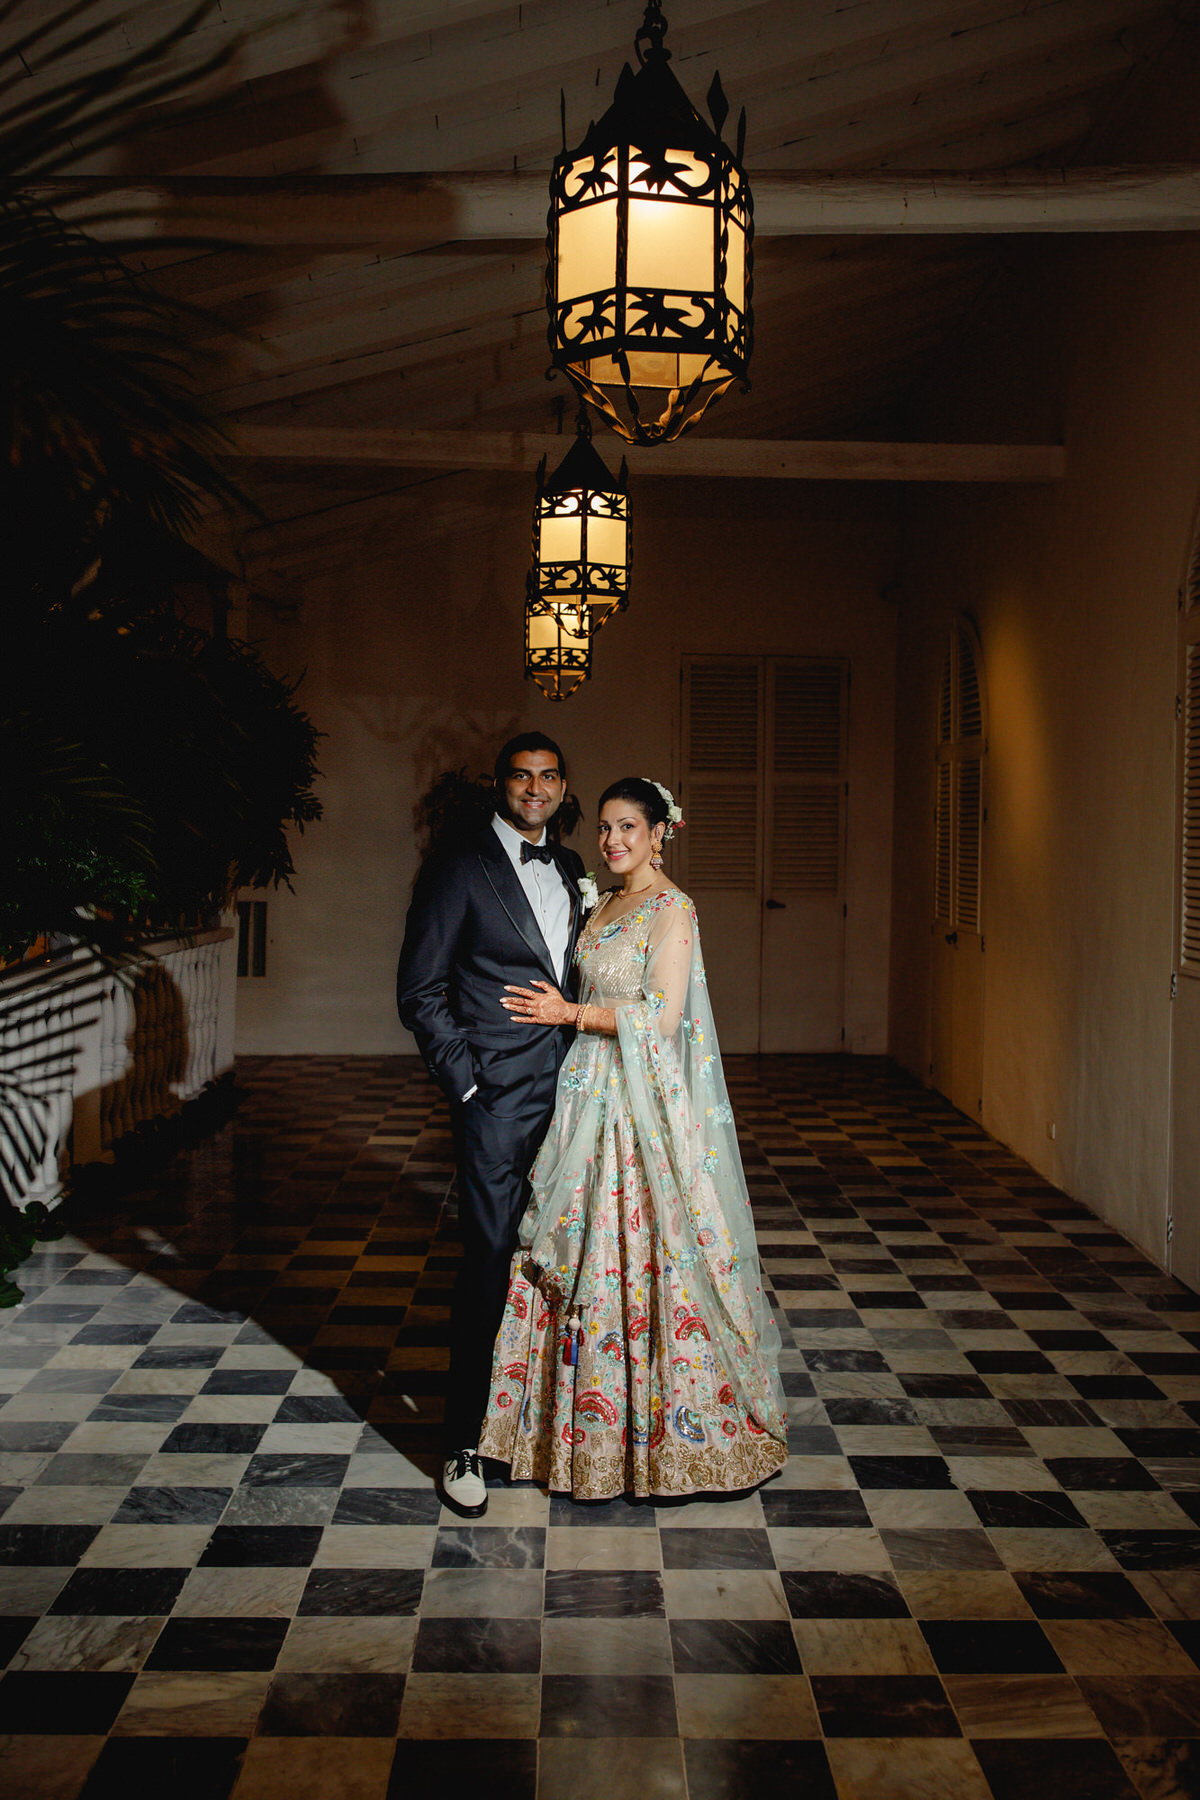 Reception outfits of Bride and Groom in Indian fusion wedding in Cartagena